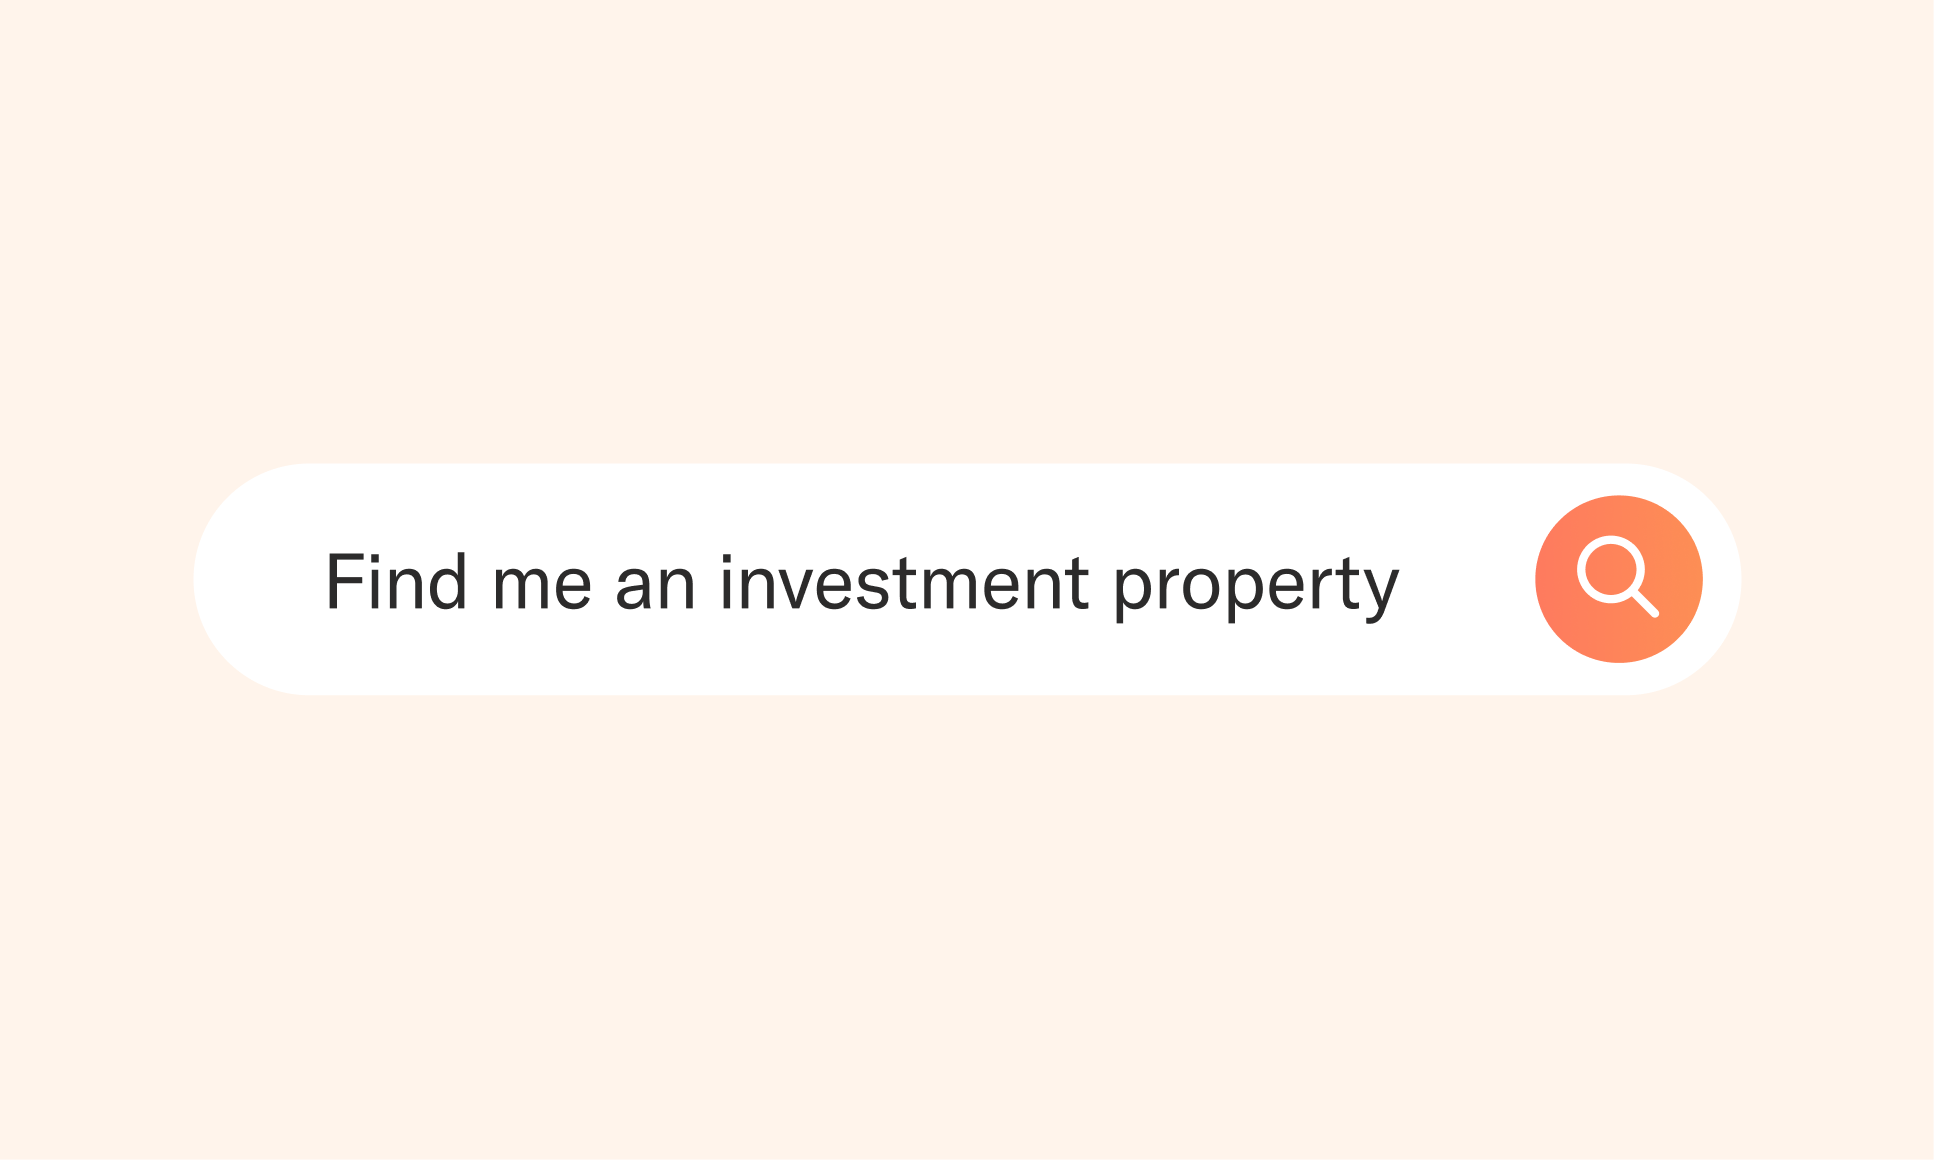 How to Find Investment Properties